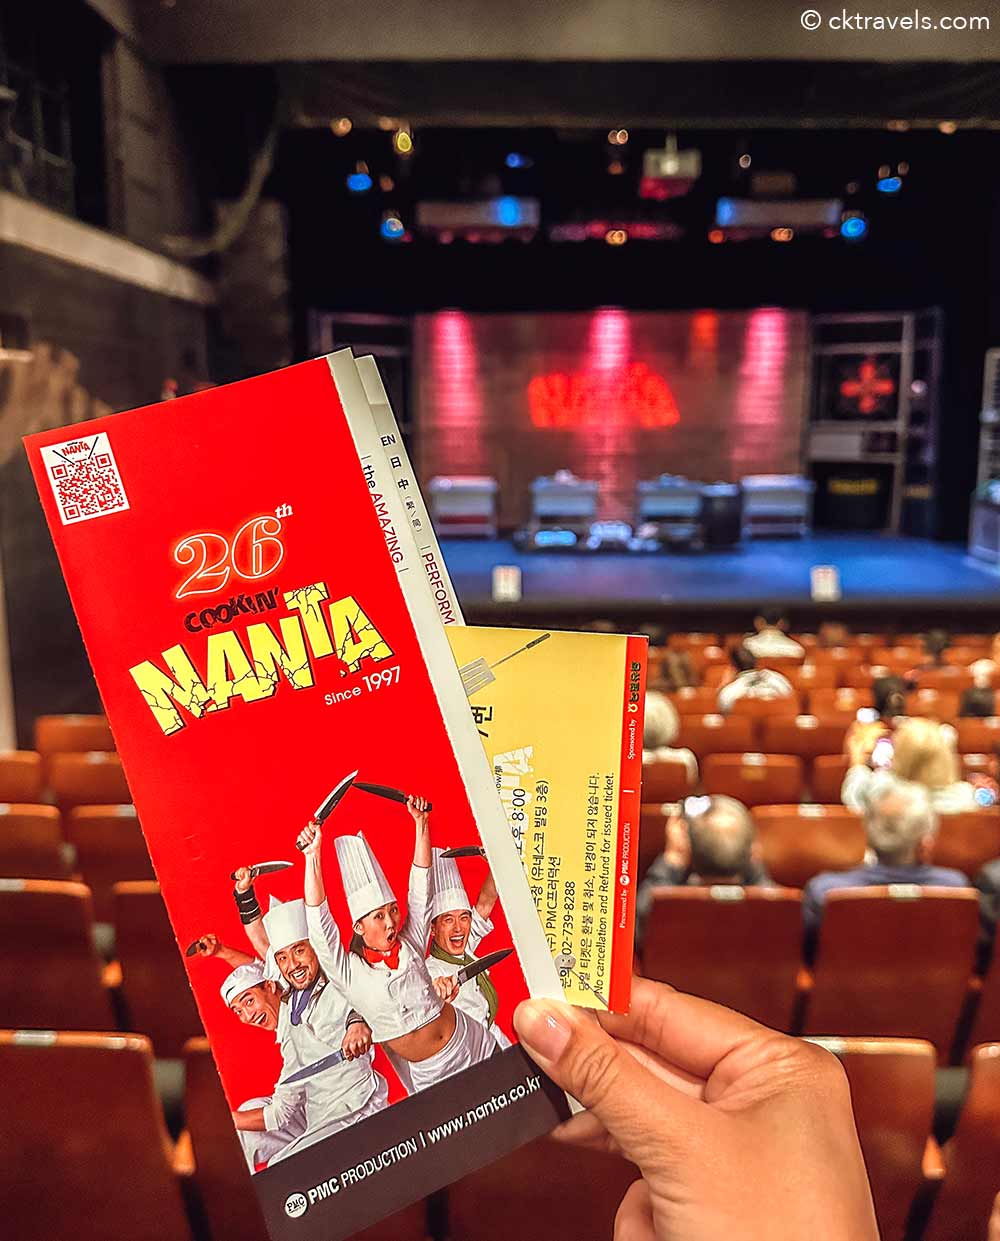 NANTA Theatre Cookery and Musical Show using Go City Seoul Pass